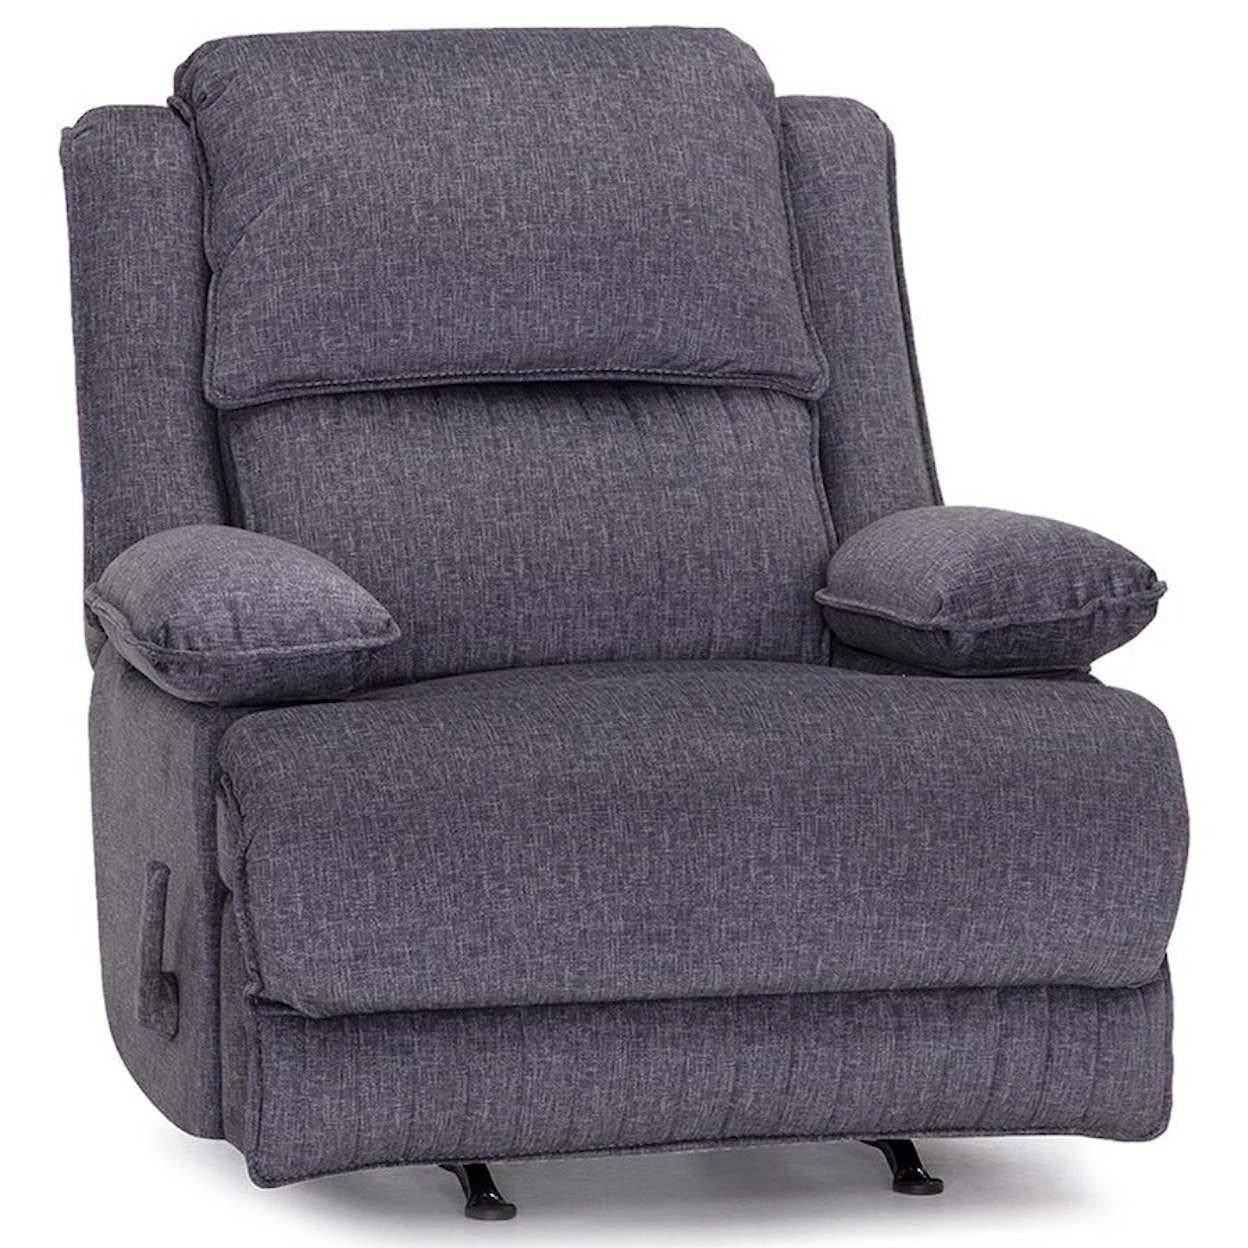 Franklin 4578 Rocker Recliner with Dual Storage Arms